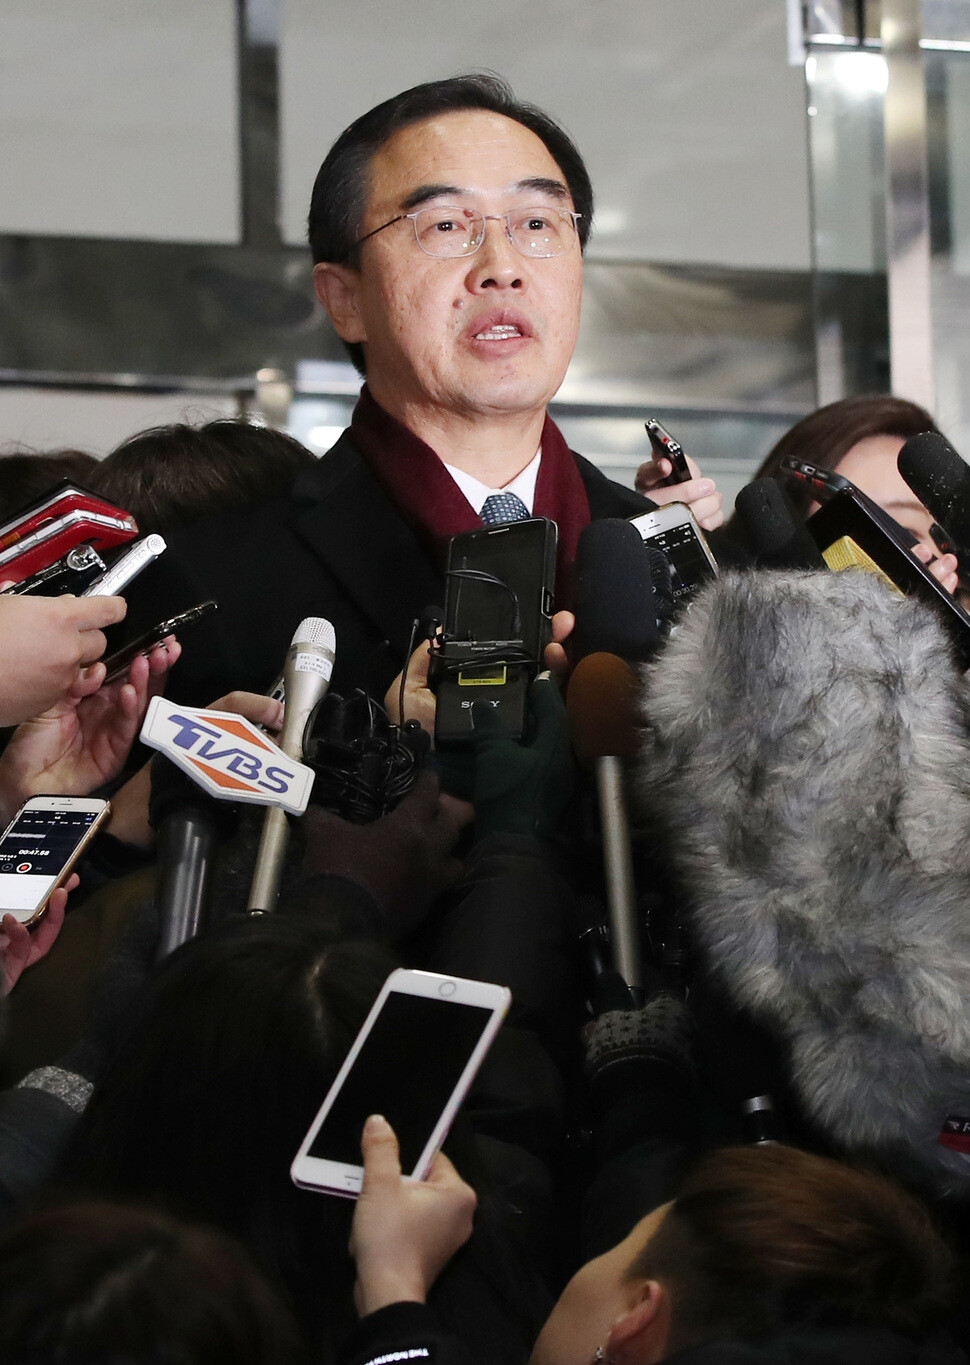 Unification Minister Cho Myoung-gyon answers reporters’ questions at the Unification Ministry building in the Jongno District of Seoul before departing for Peace House at Panmunjeom